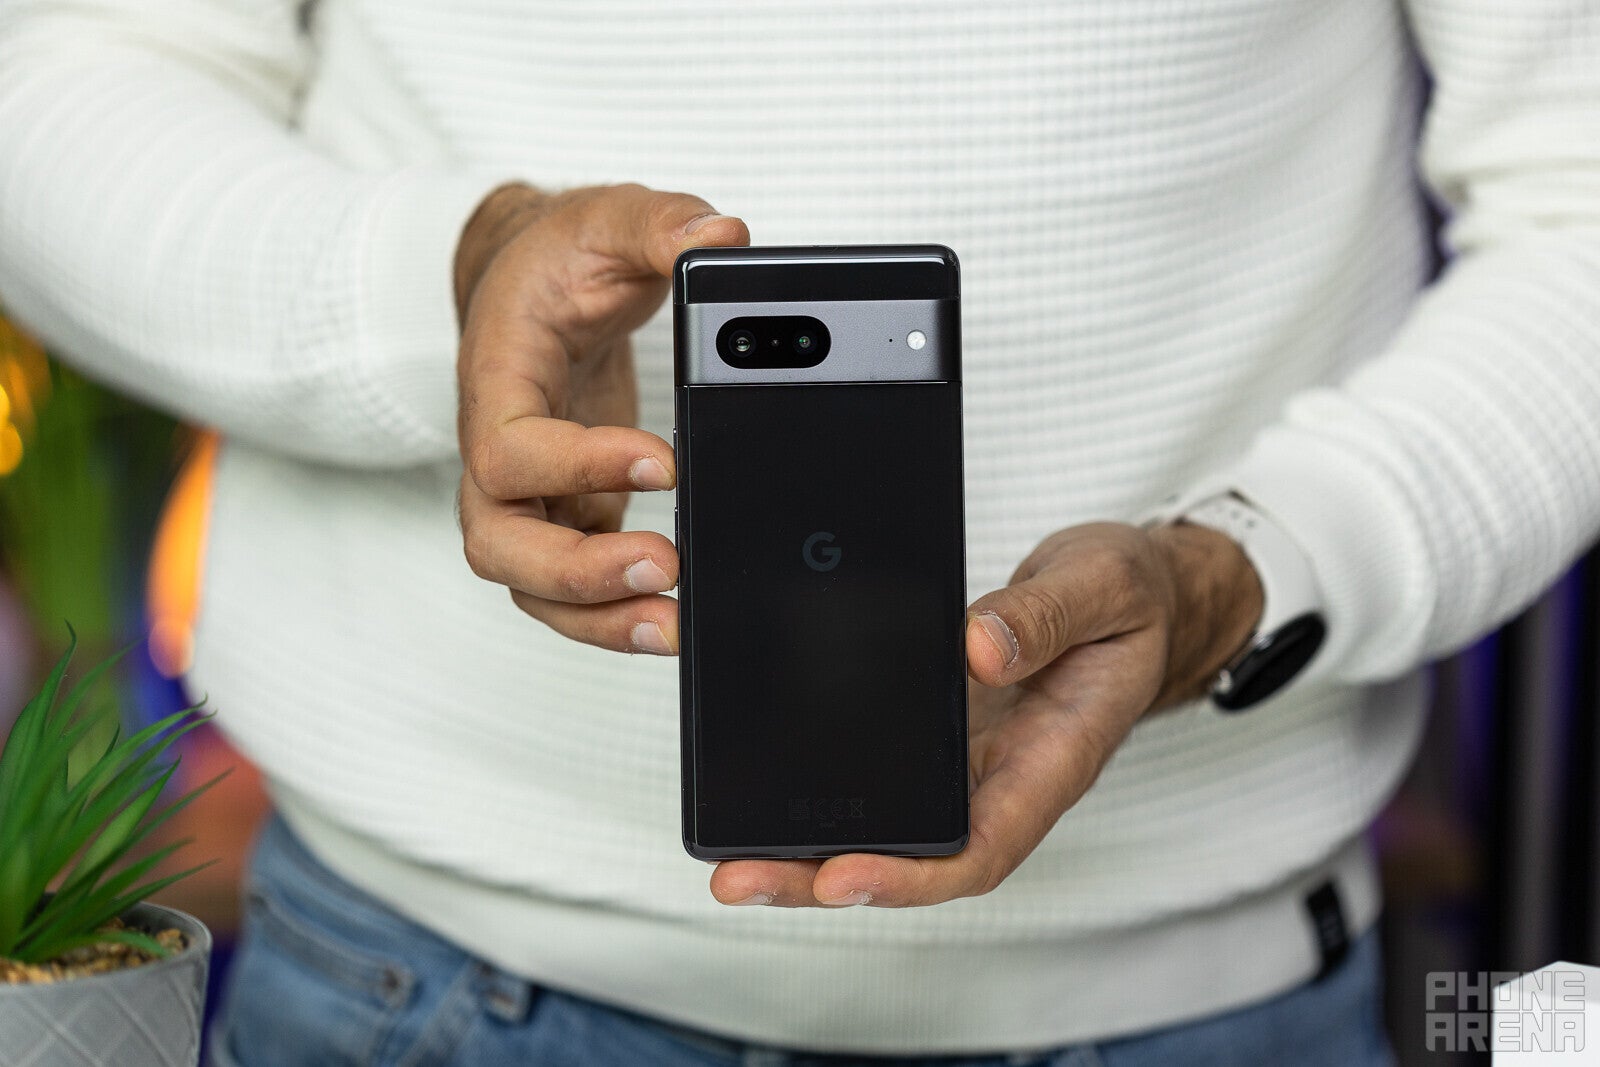 The release of the Pixel 7 series came too late to be included in the third quarter - Unexpected drop in YouTube's Q3 revenue leads to a crash in Alphabet shares